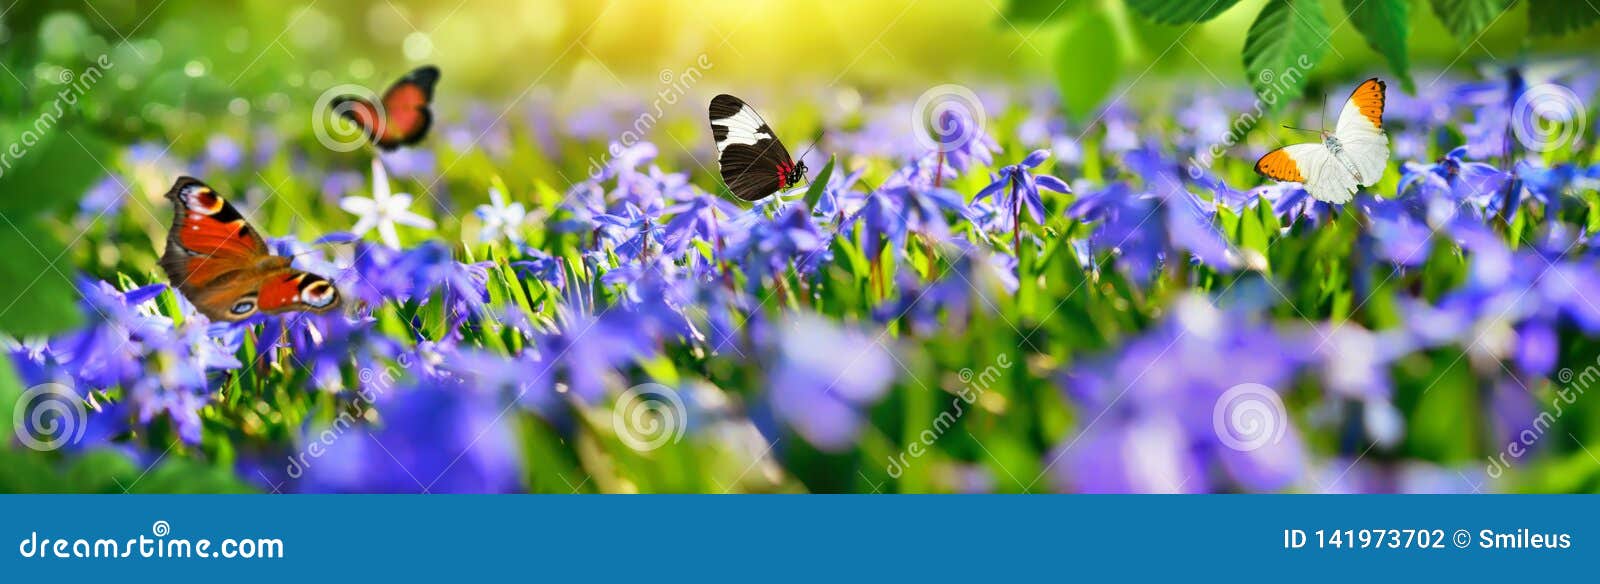 small paradise with spring flowers and butterflies